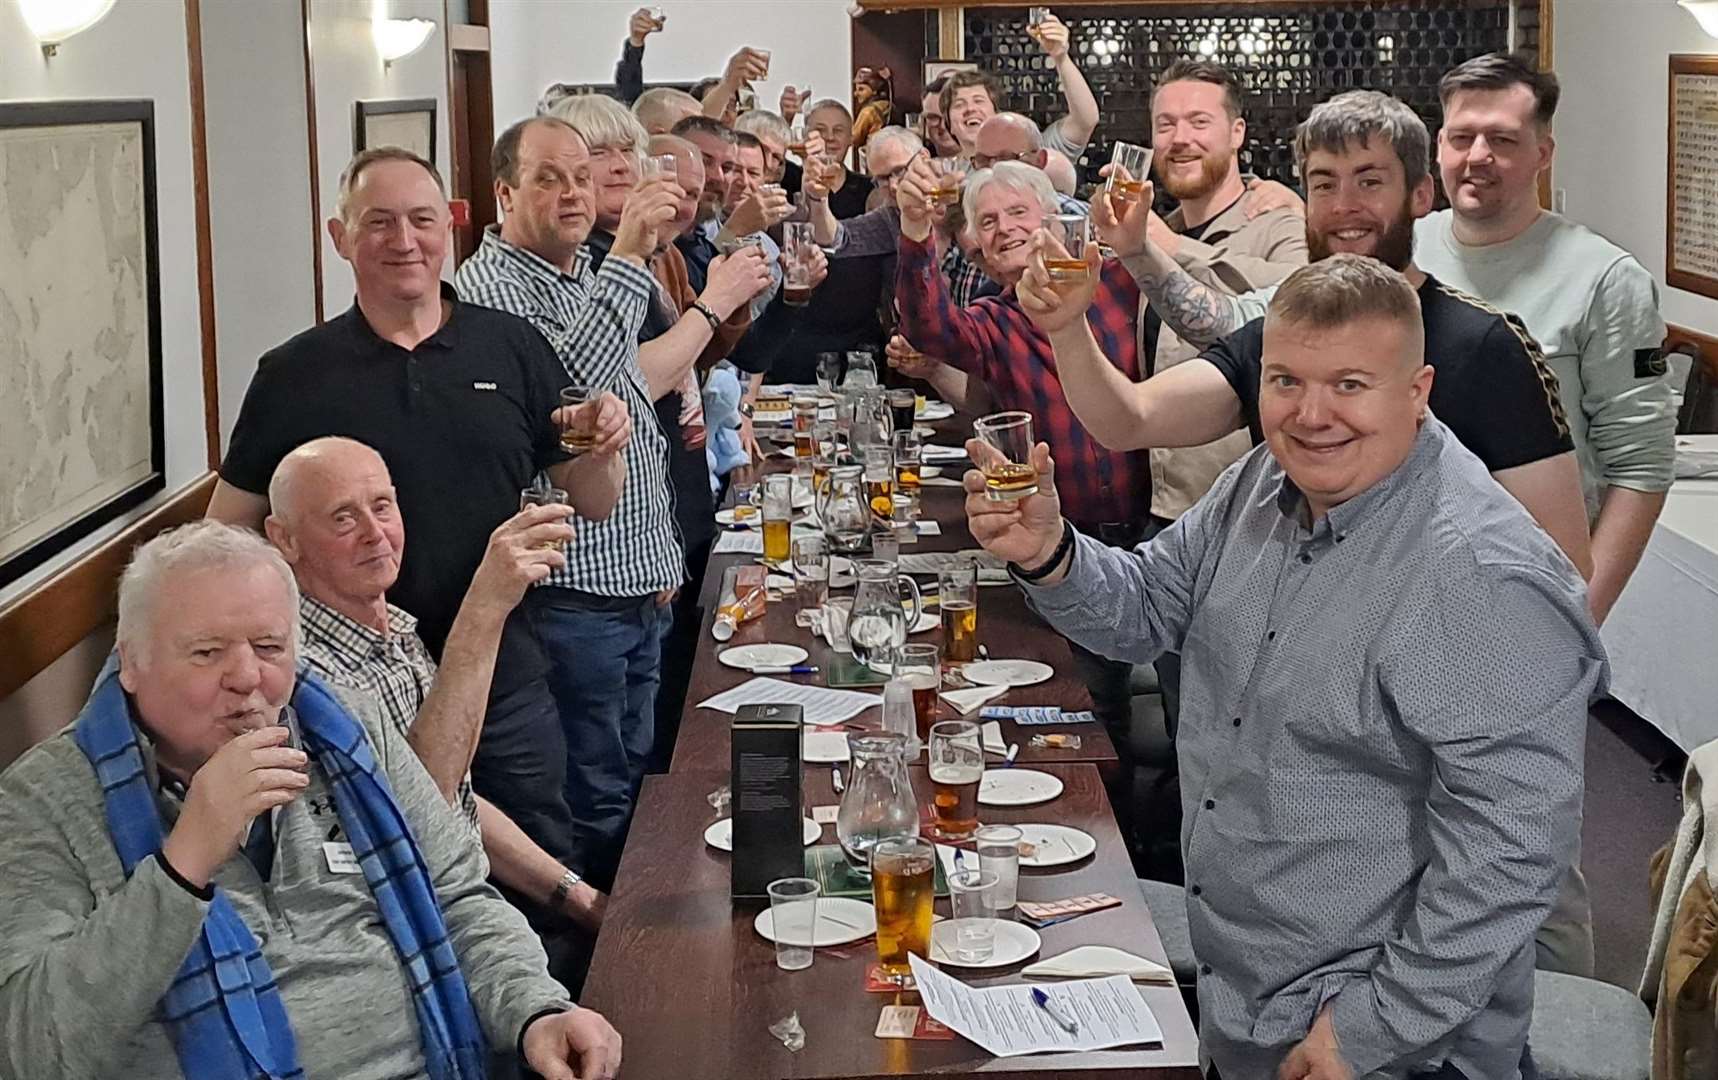 The whisky-tasting session for Scotland’s Charity Air Ambulance.